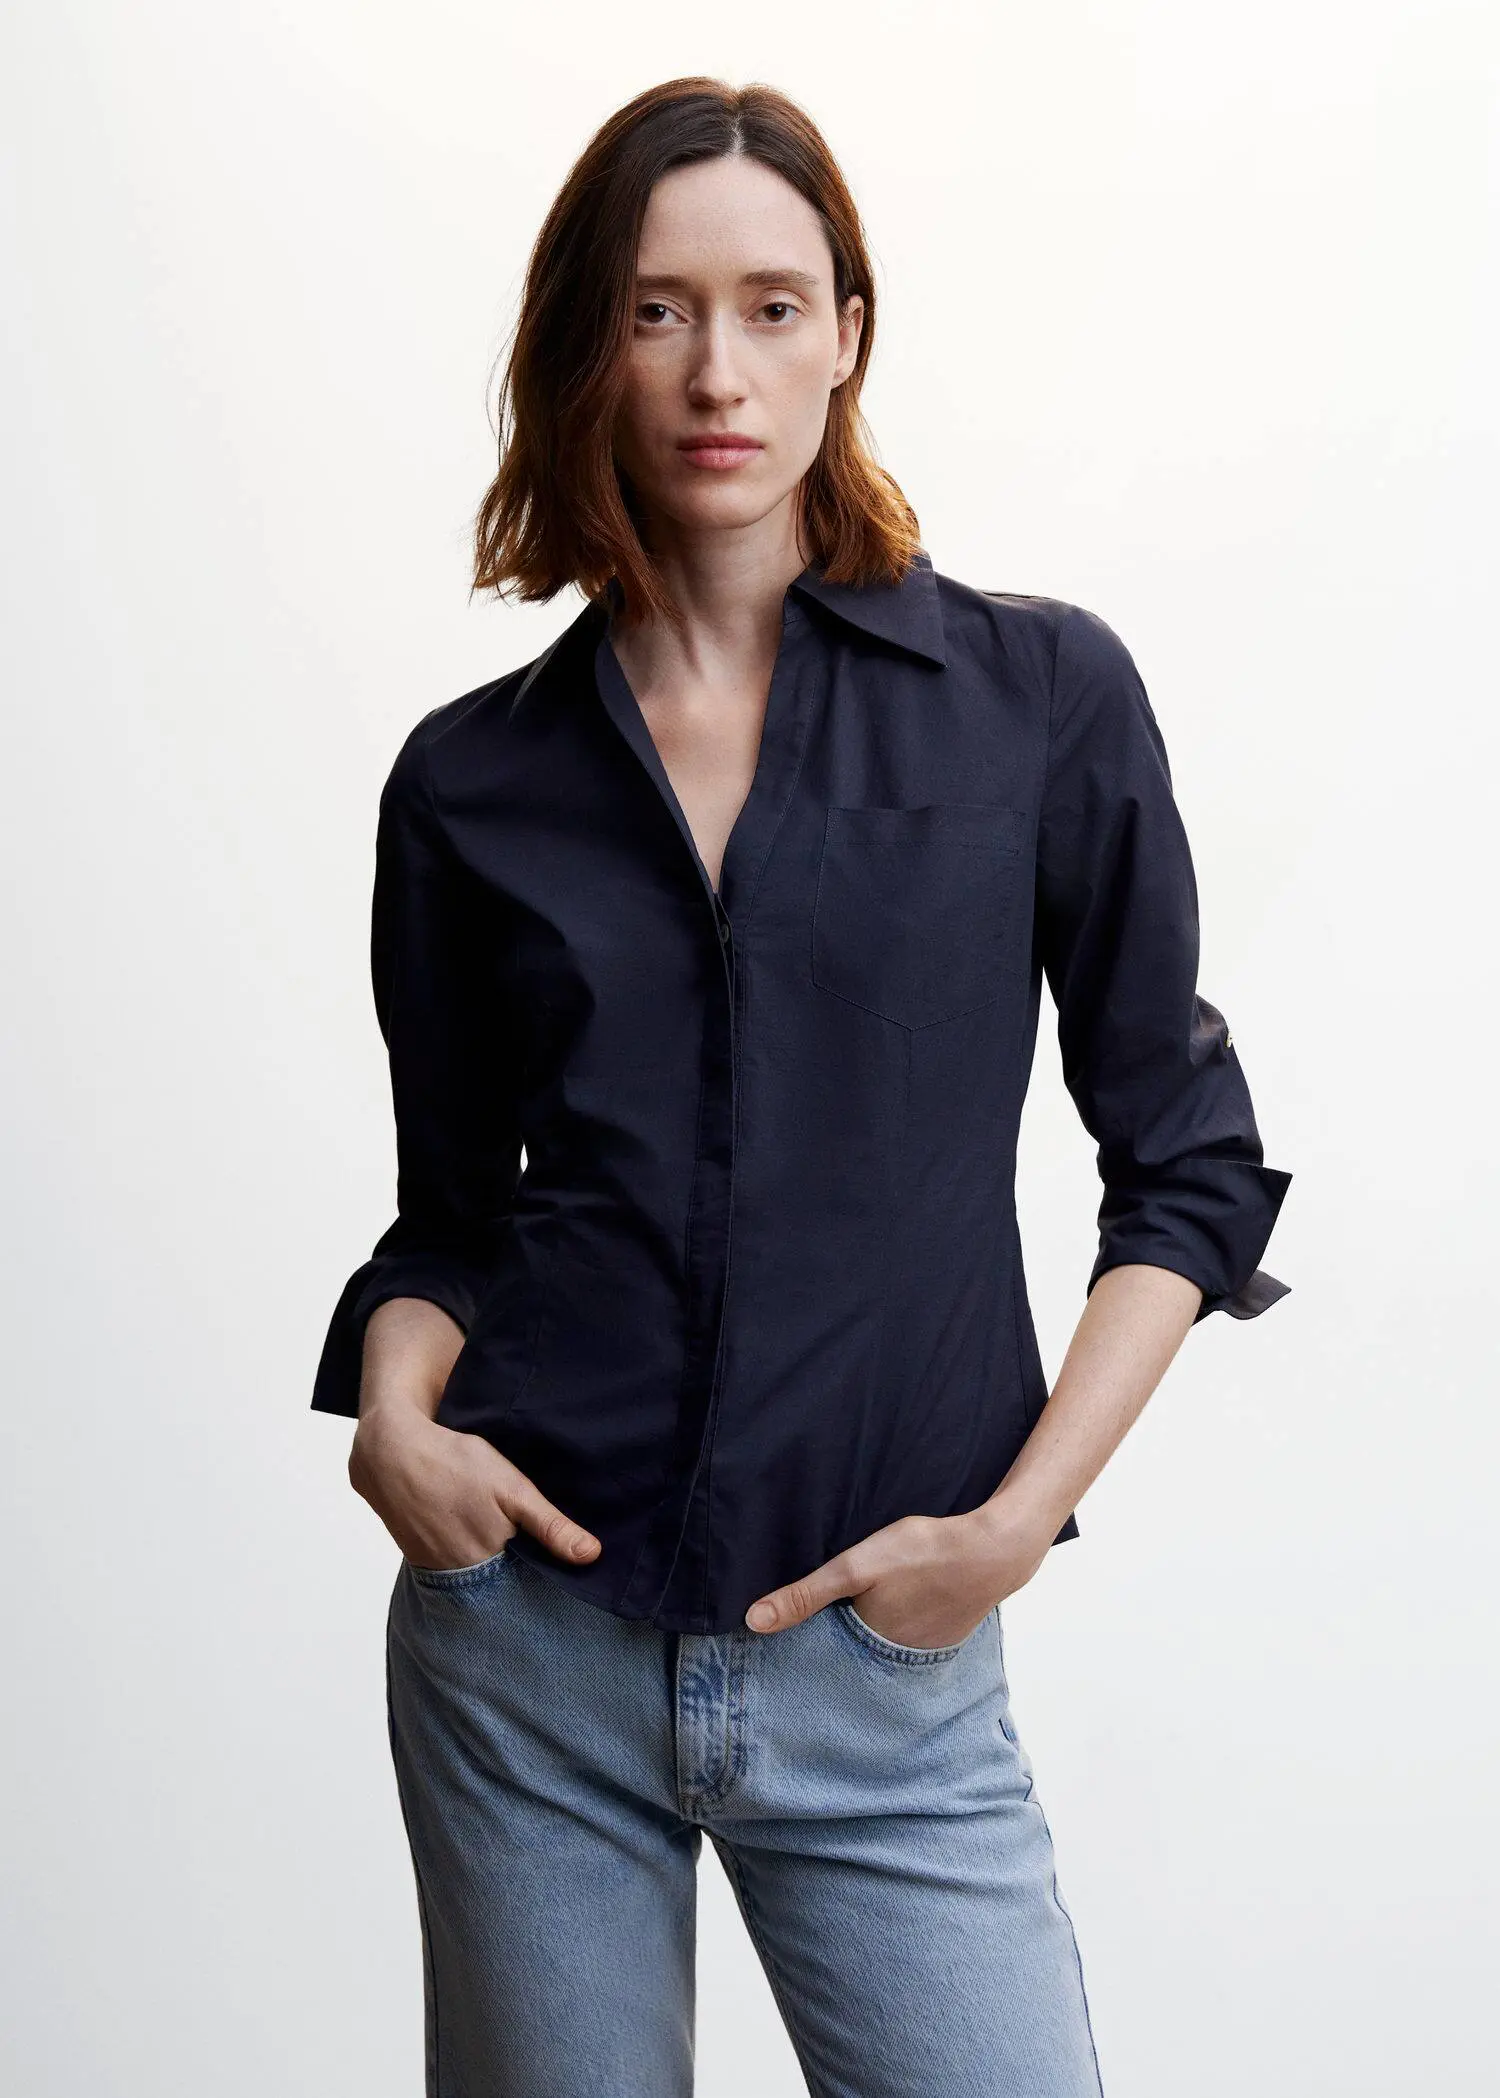 Mango Pleated cotton shirt. a woman wearing a black shirt and jeans. 